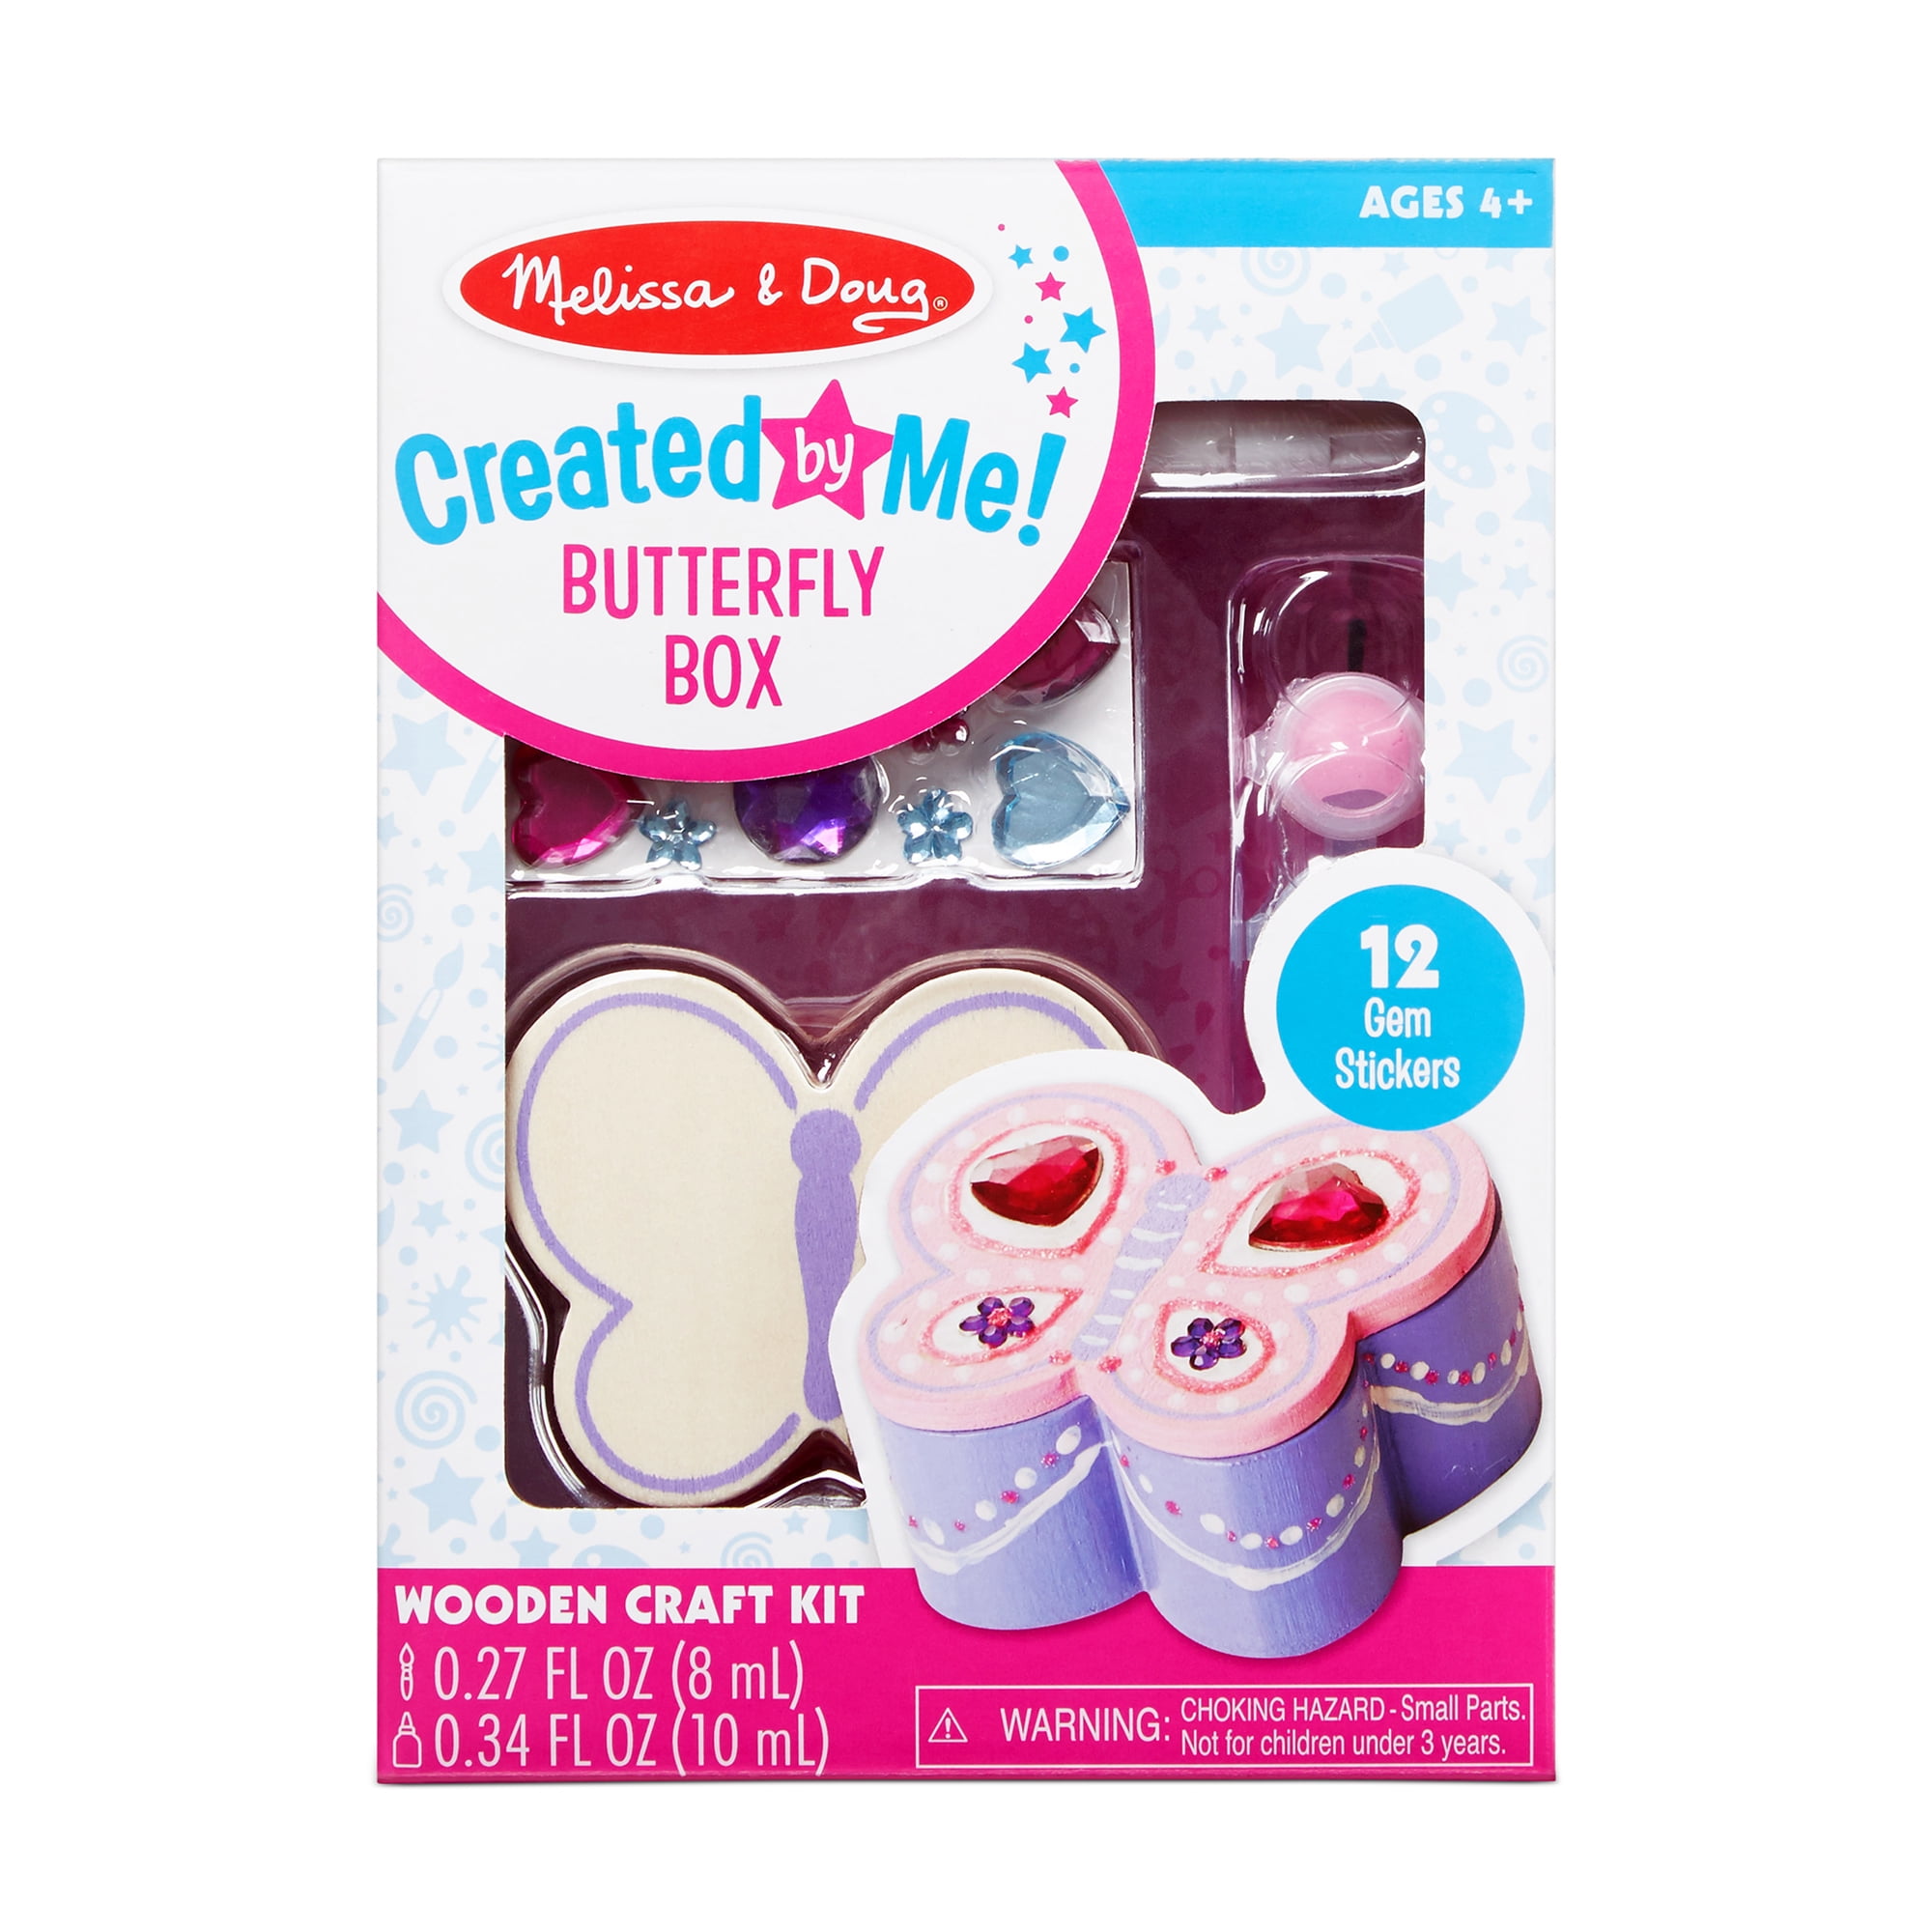 Melissa & Doug Decorate-Your-Own Wooden Heart Box Craft Kit 